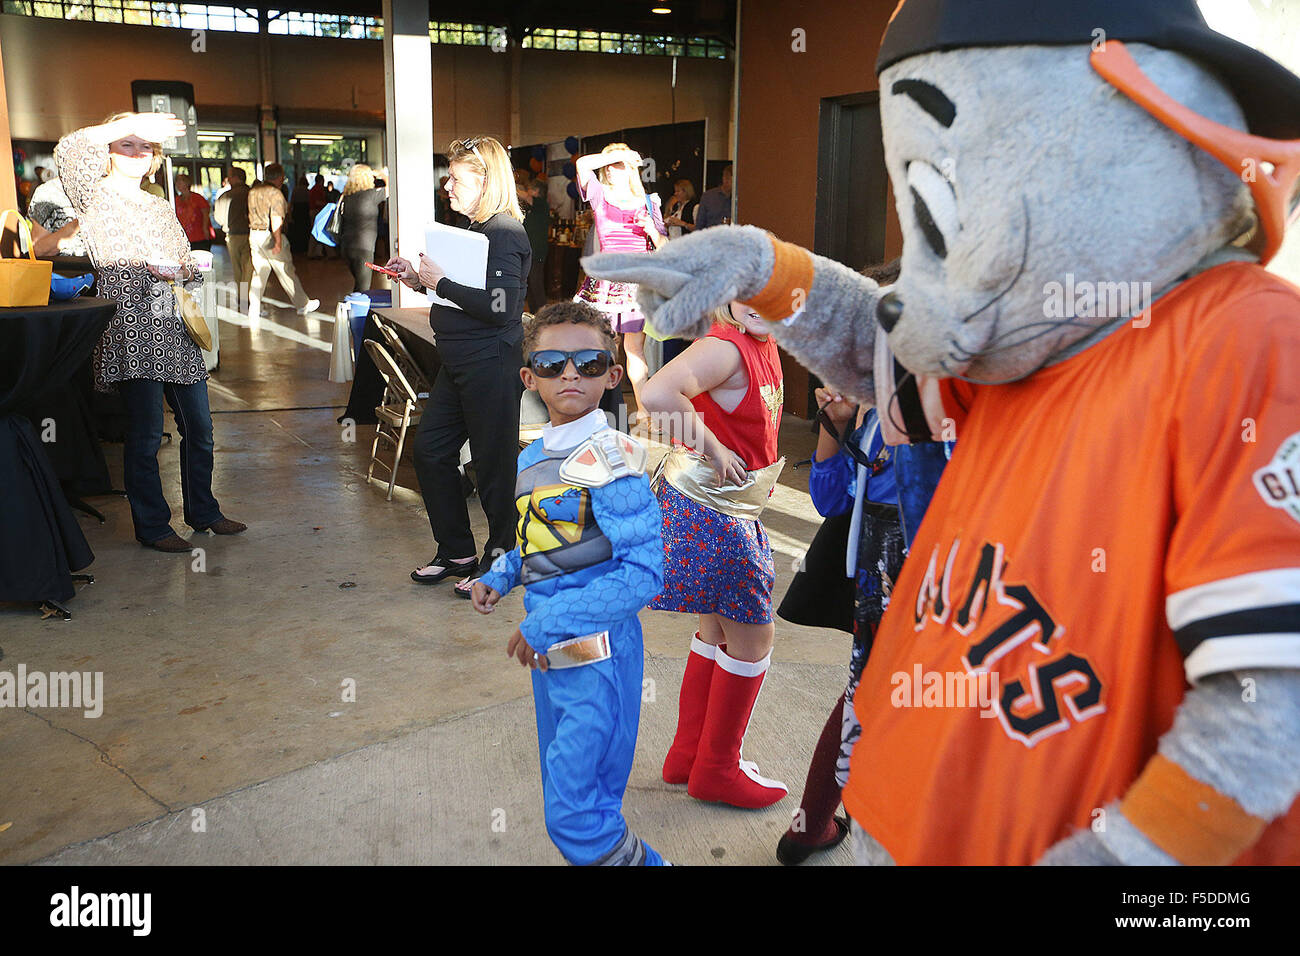 Napa, CA, USA. 29th Oct, 2015. A popular face at the Napa Valley Business Expo, San Francisco Giants mascot Lou Seal points to Elijah Stanley before the costume contest in the Chardonnay Hall at the Napa Valley Expo on Thursday. © Napa Valley Register/ZUMA Wire/Alamy Live News Stock Photo